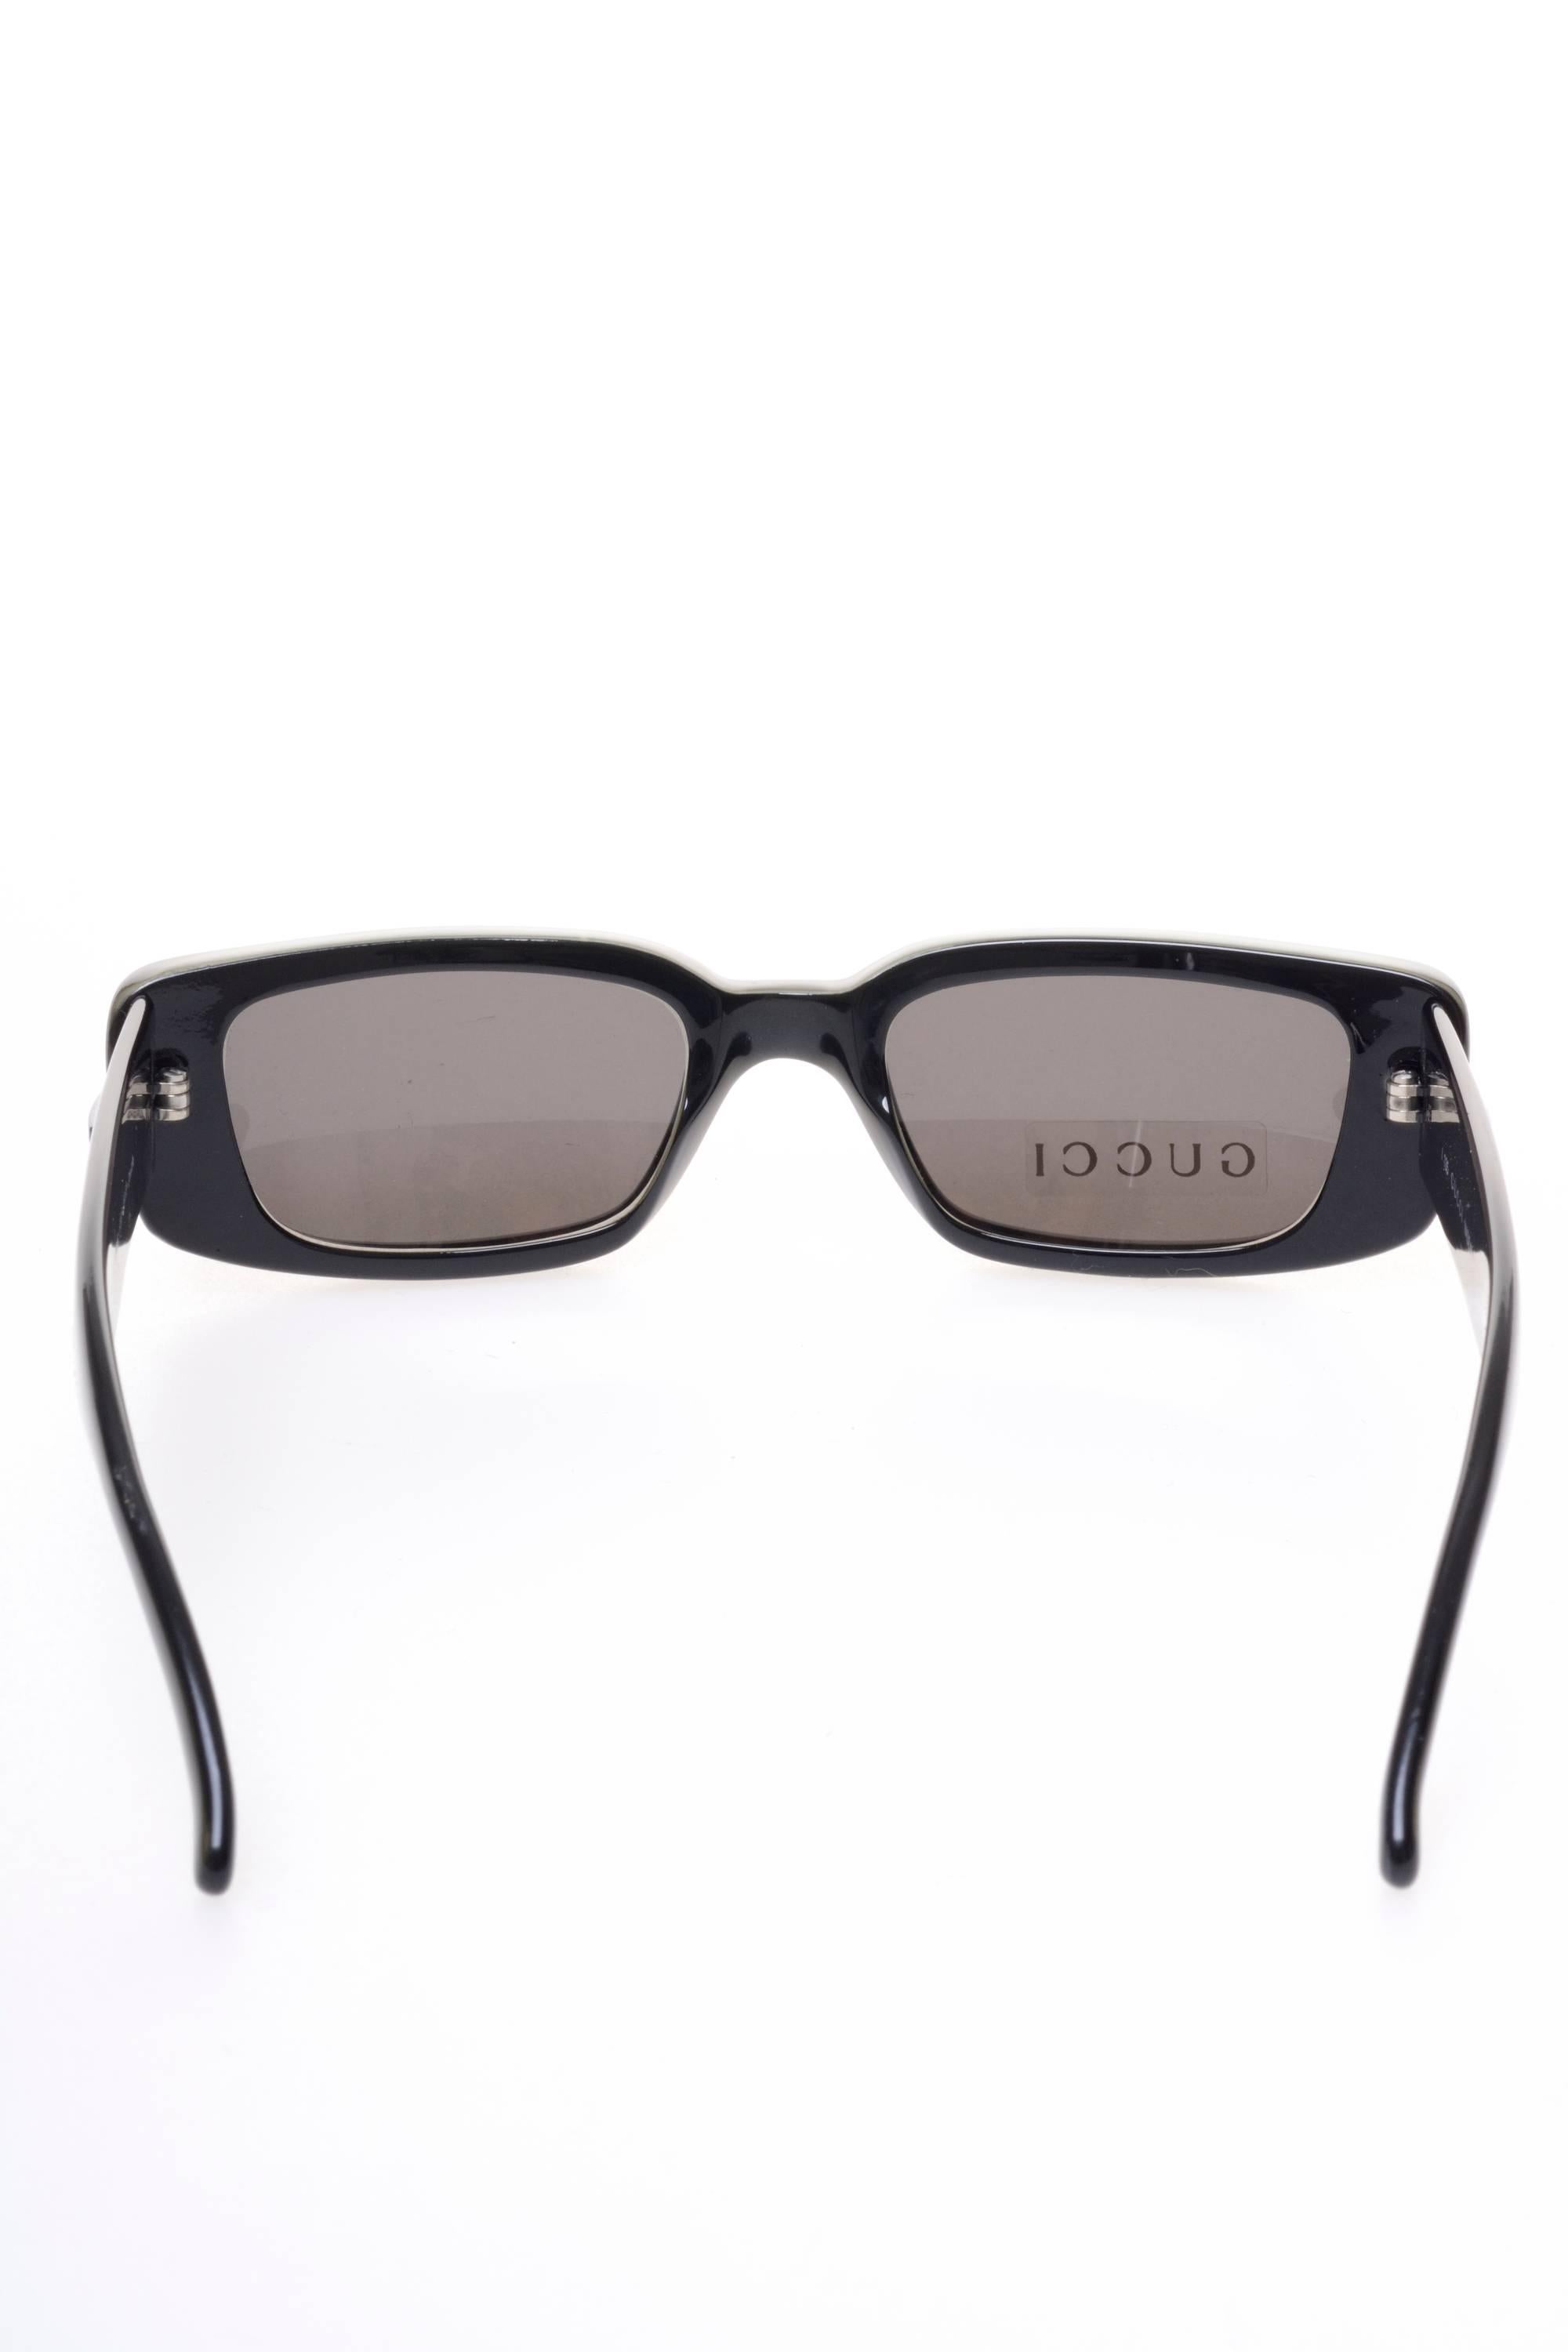 These square sunglasses by GUCCI are in a pearly green plastic with pearly black plastic details. The lenses are totally black and have a label. Made in Italy

Excellent condition   

Brand: GUCCI - Made in Italy

Measurements: 
Temple length: 5,5